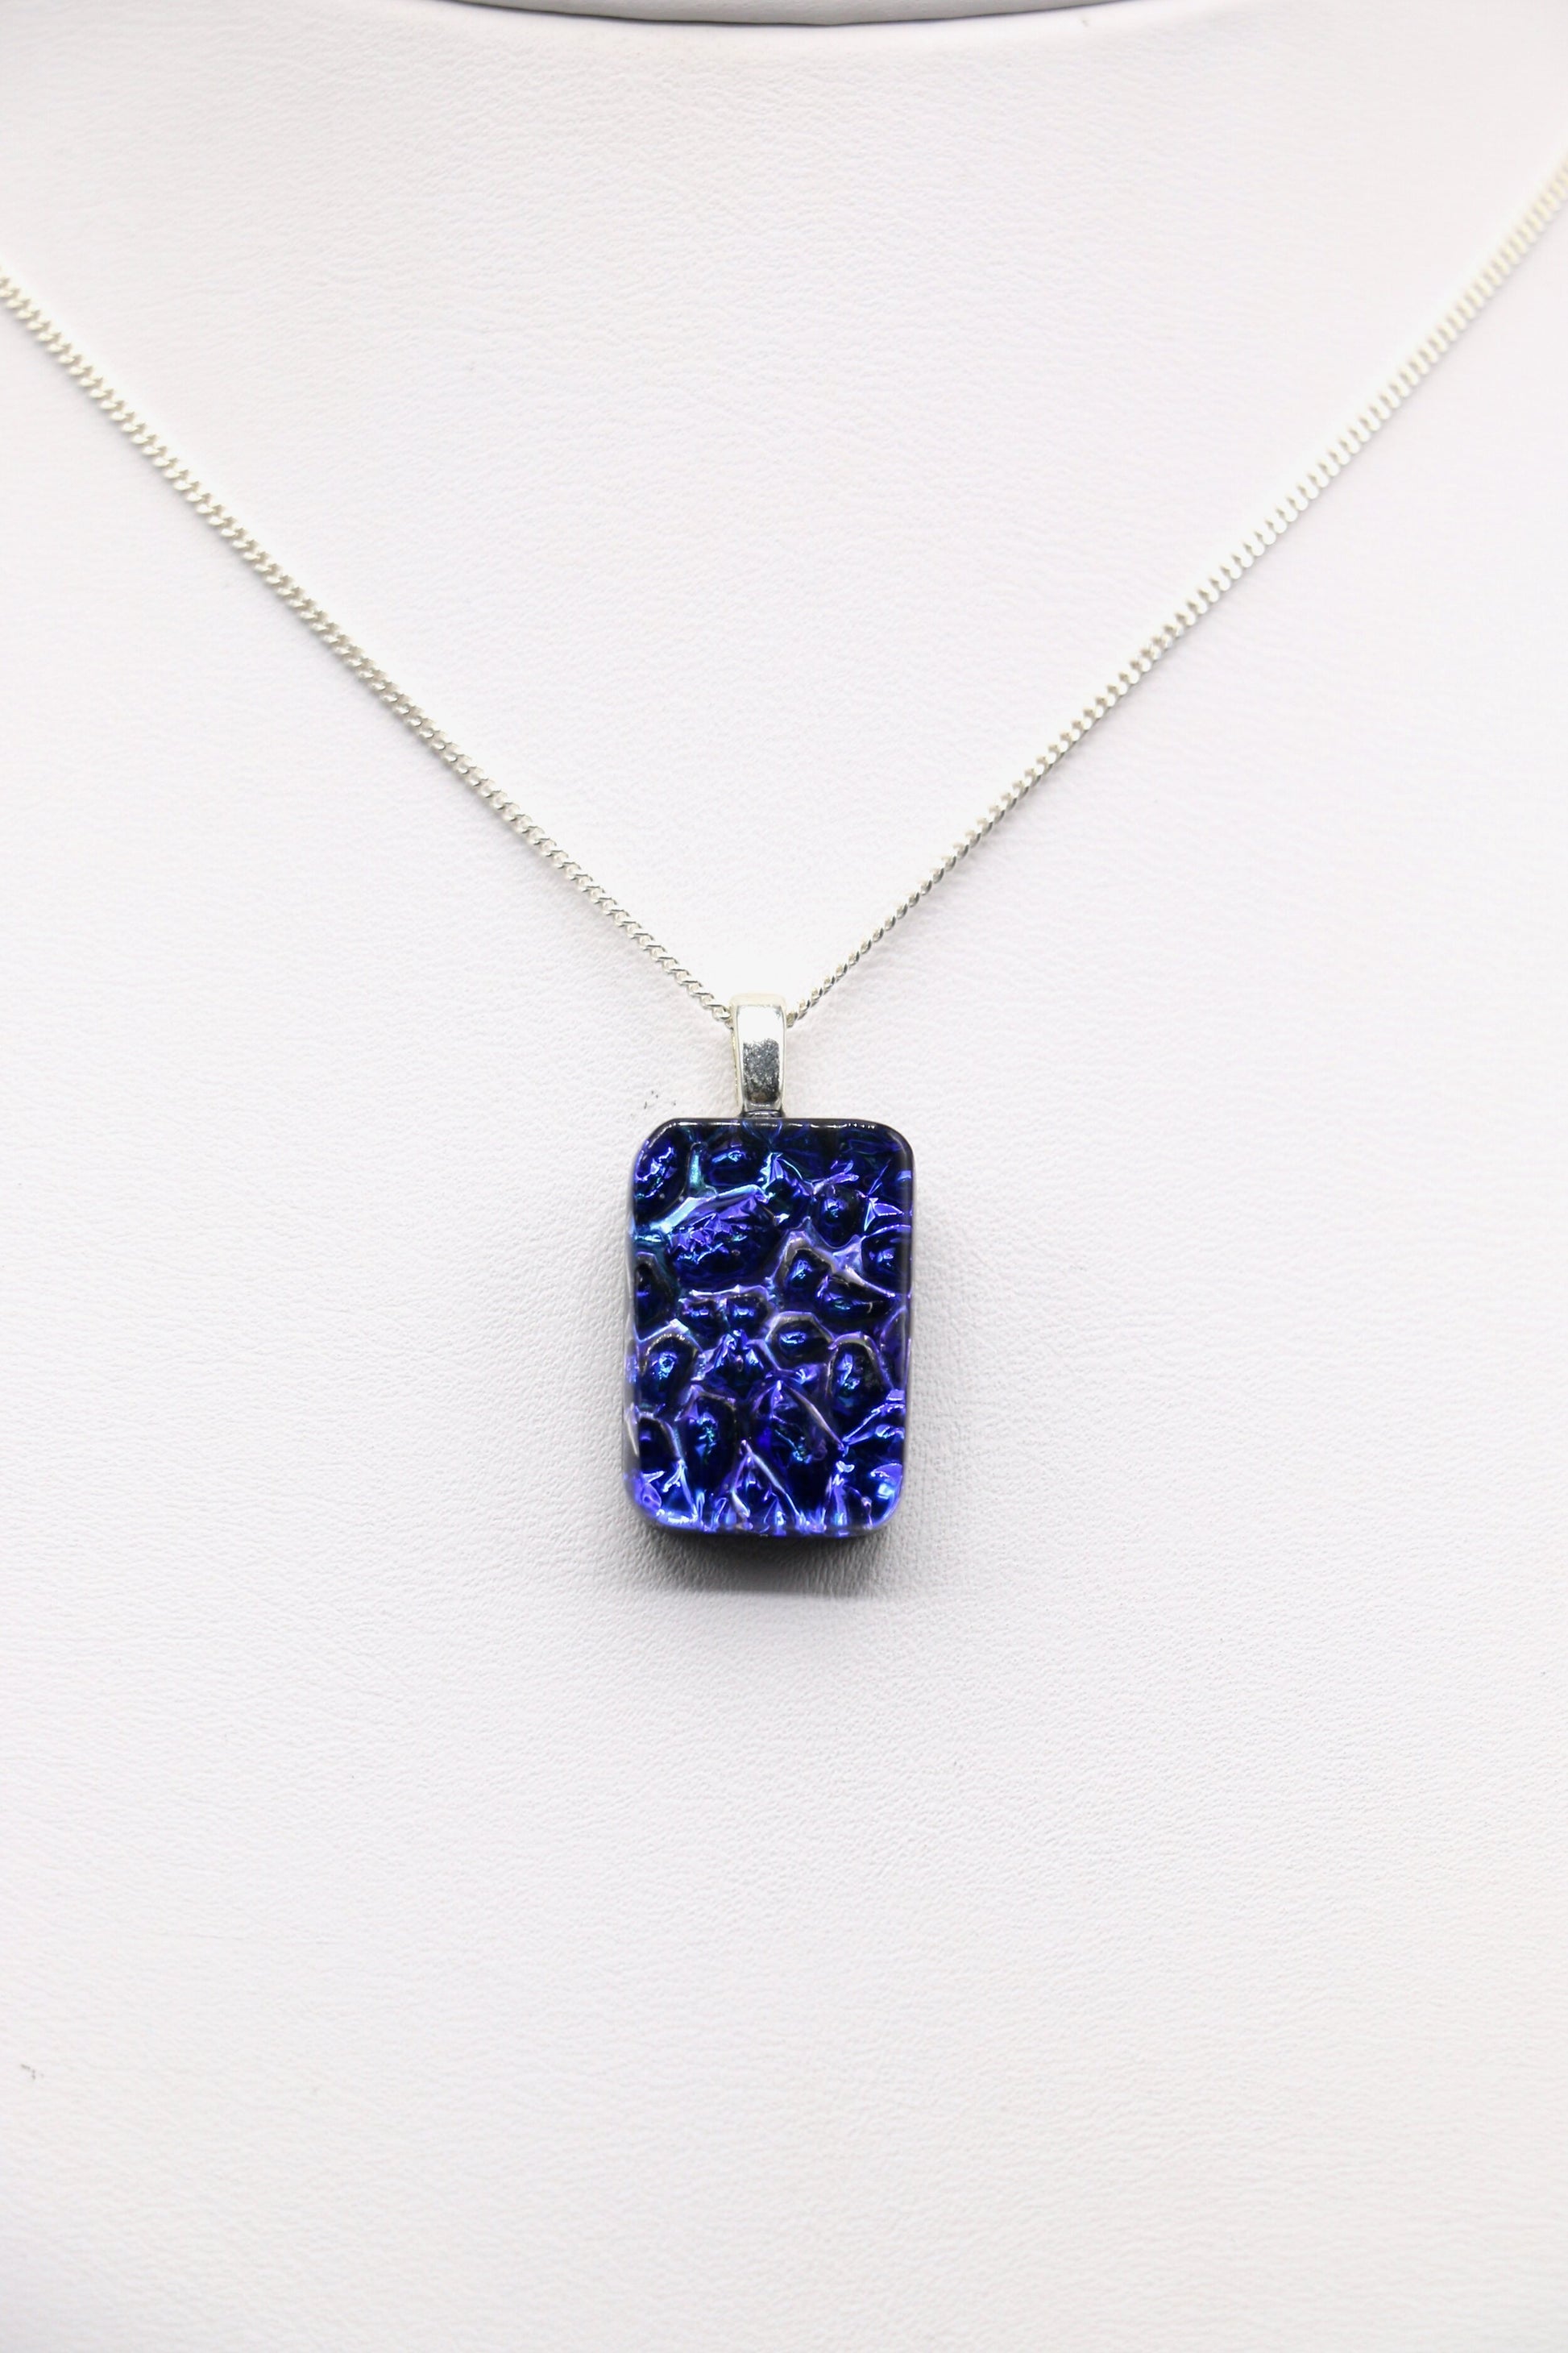 Fused Glass Necklace - 2715